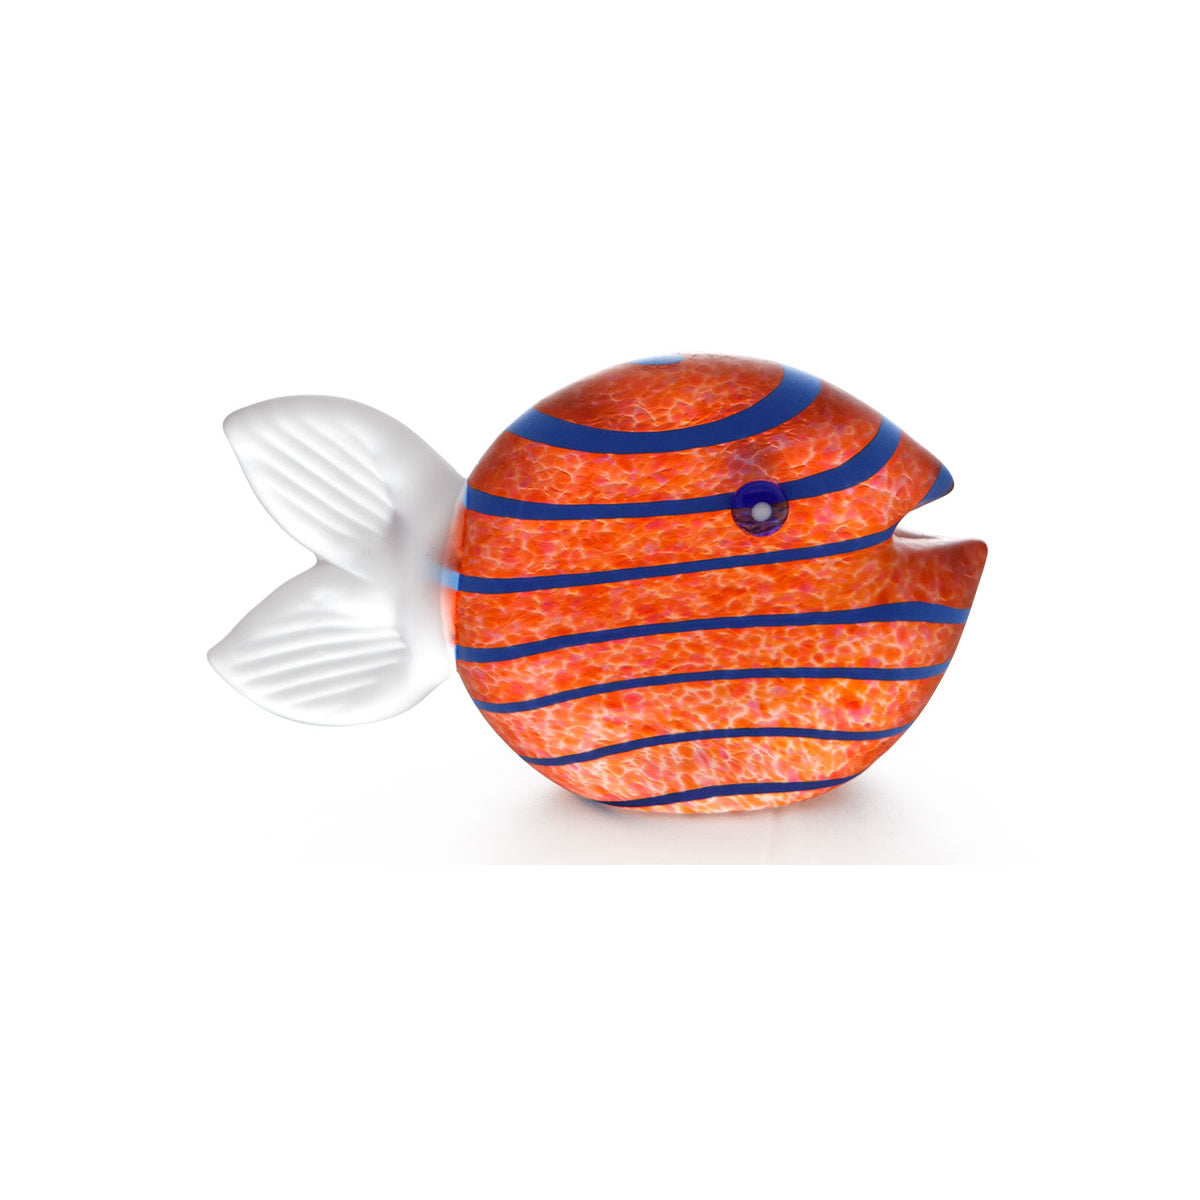 Snippy Fish Paperweight, Amber- by Borowski